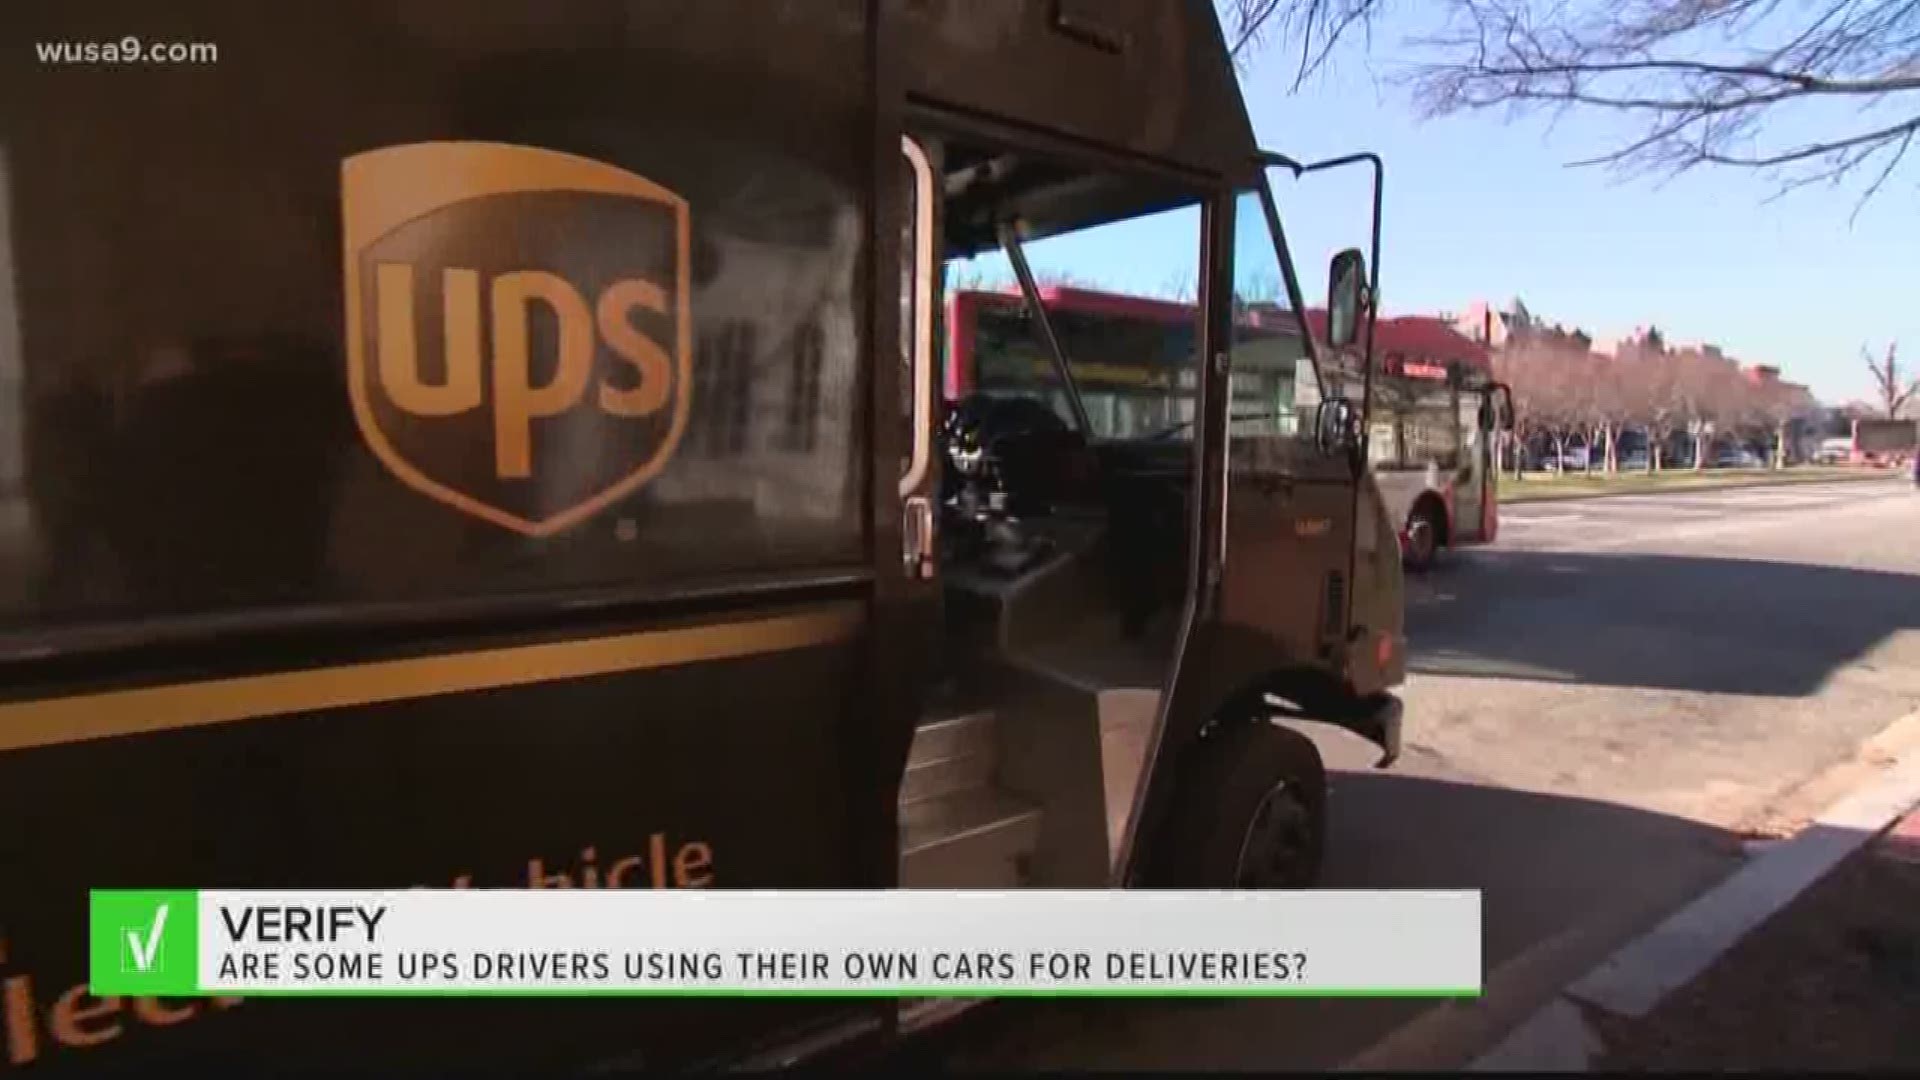 UPS verified that during peak holiday season, some jobs are done by seasonal employees, who drive their personal vehicles.